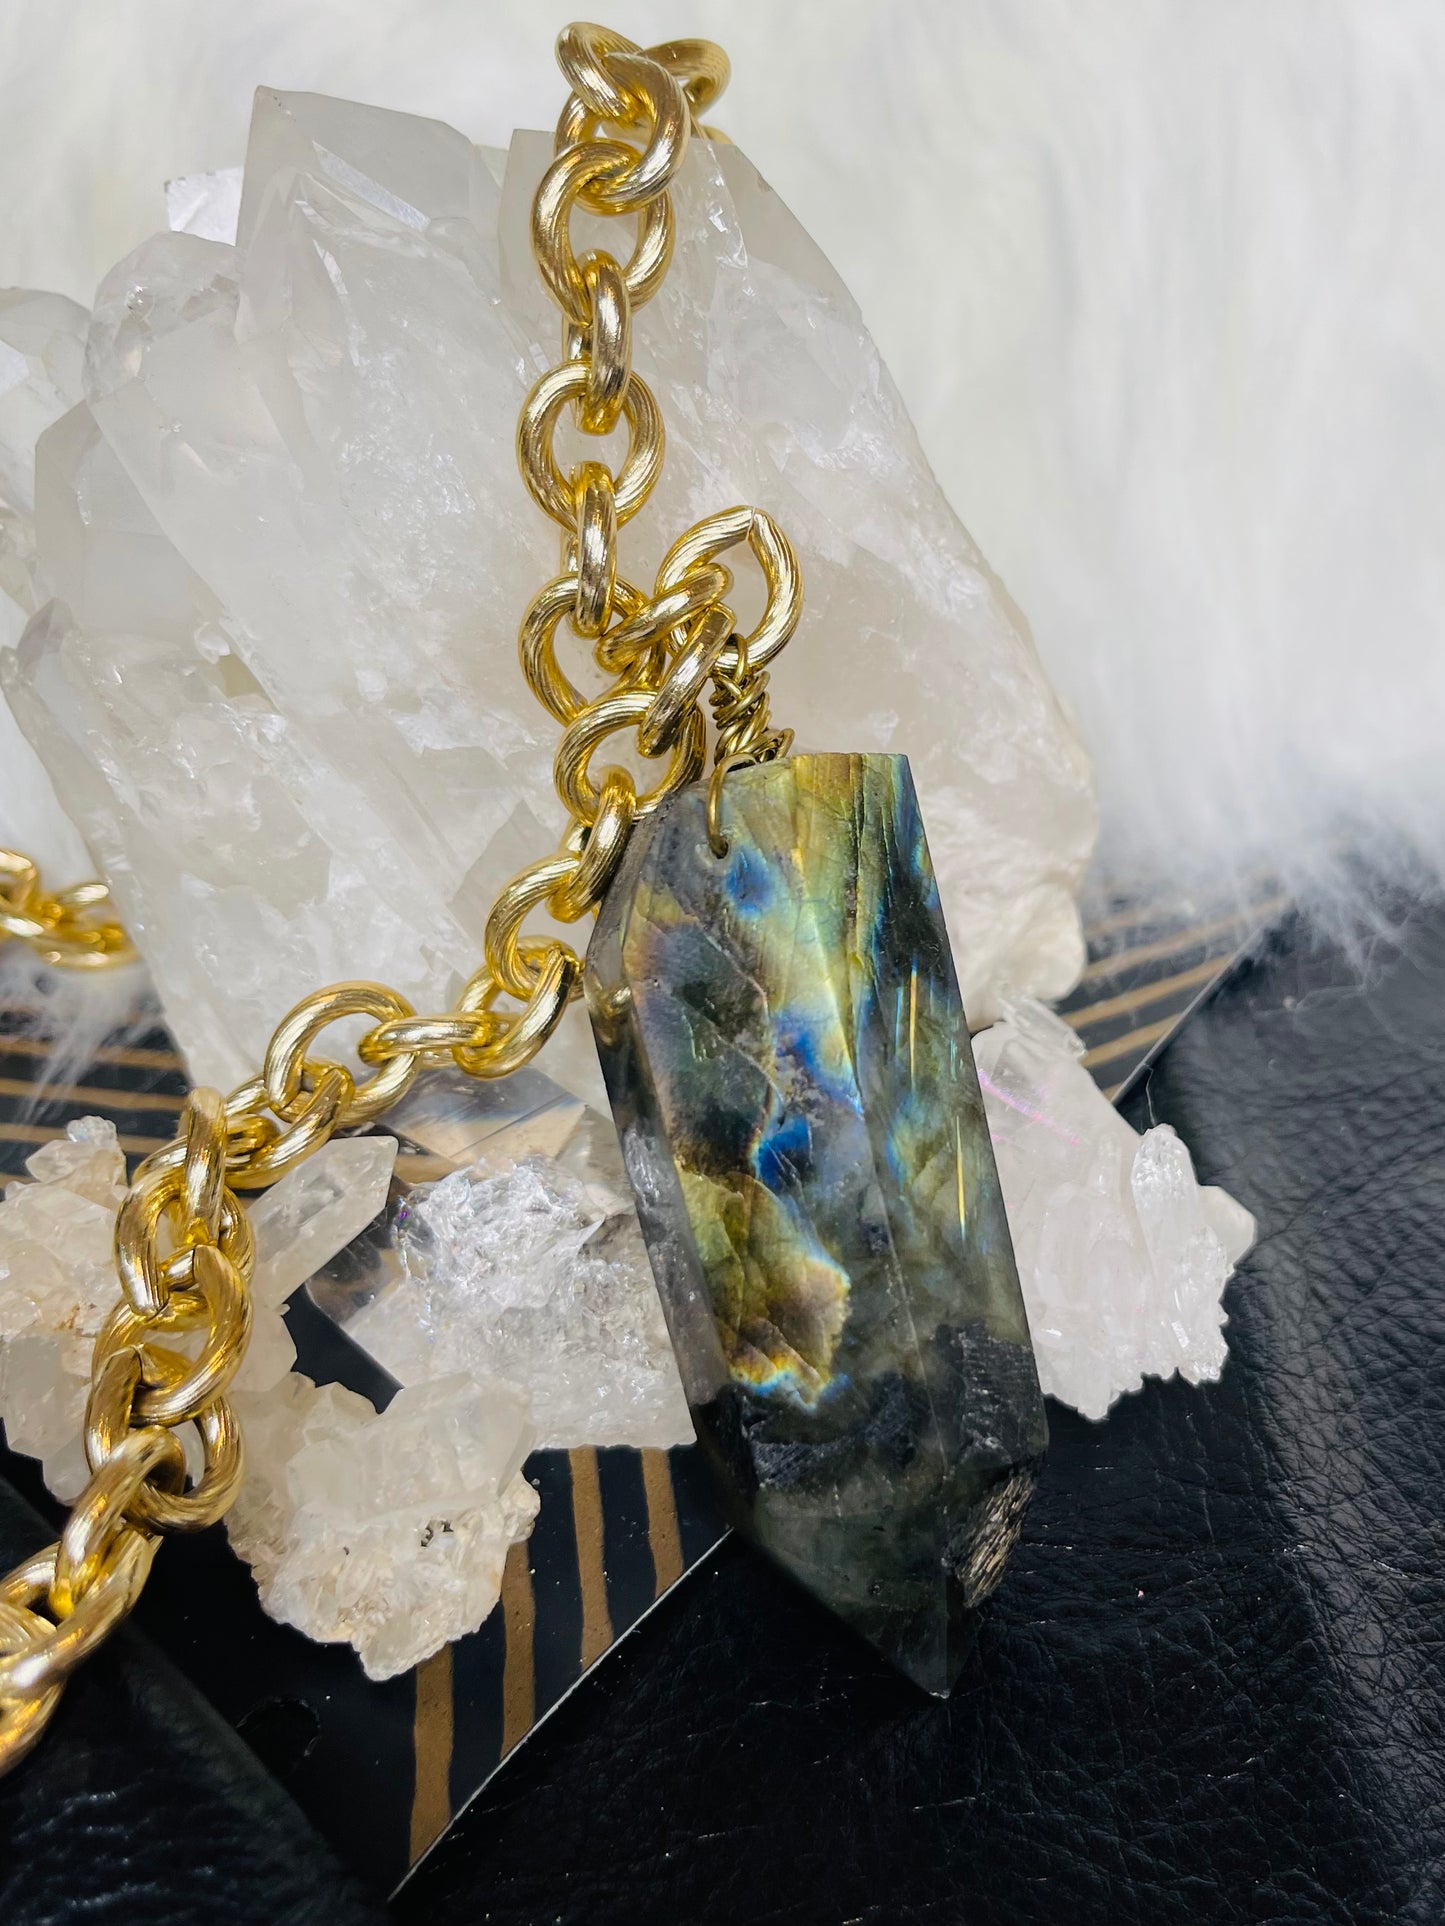 Massive Labradorite Crystal Soul Chain Necklace - Vintage Gold Chain- Akashic Records Collection